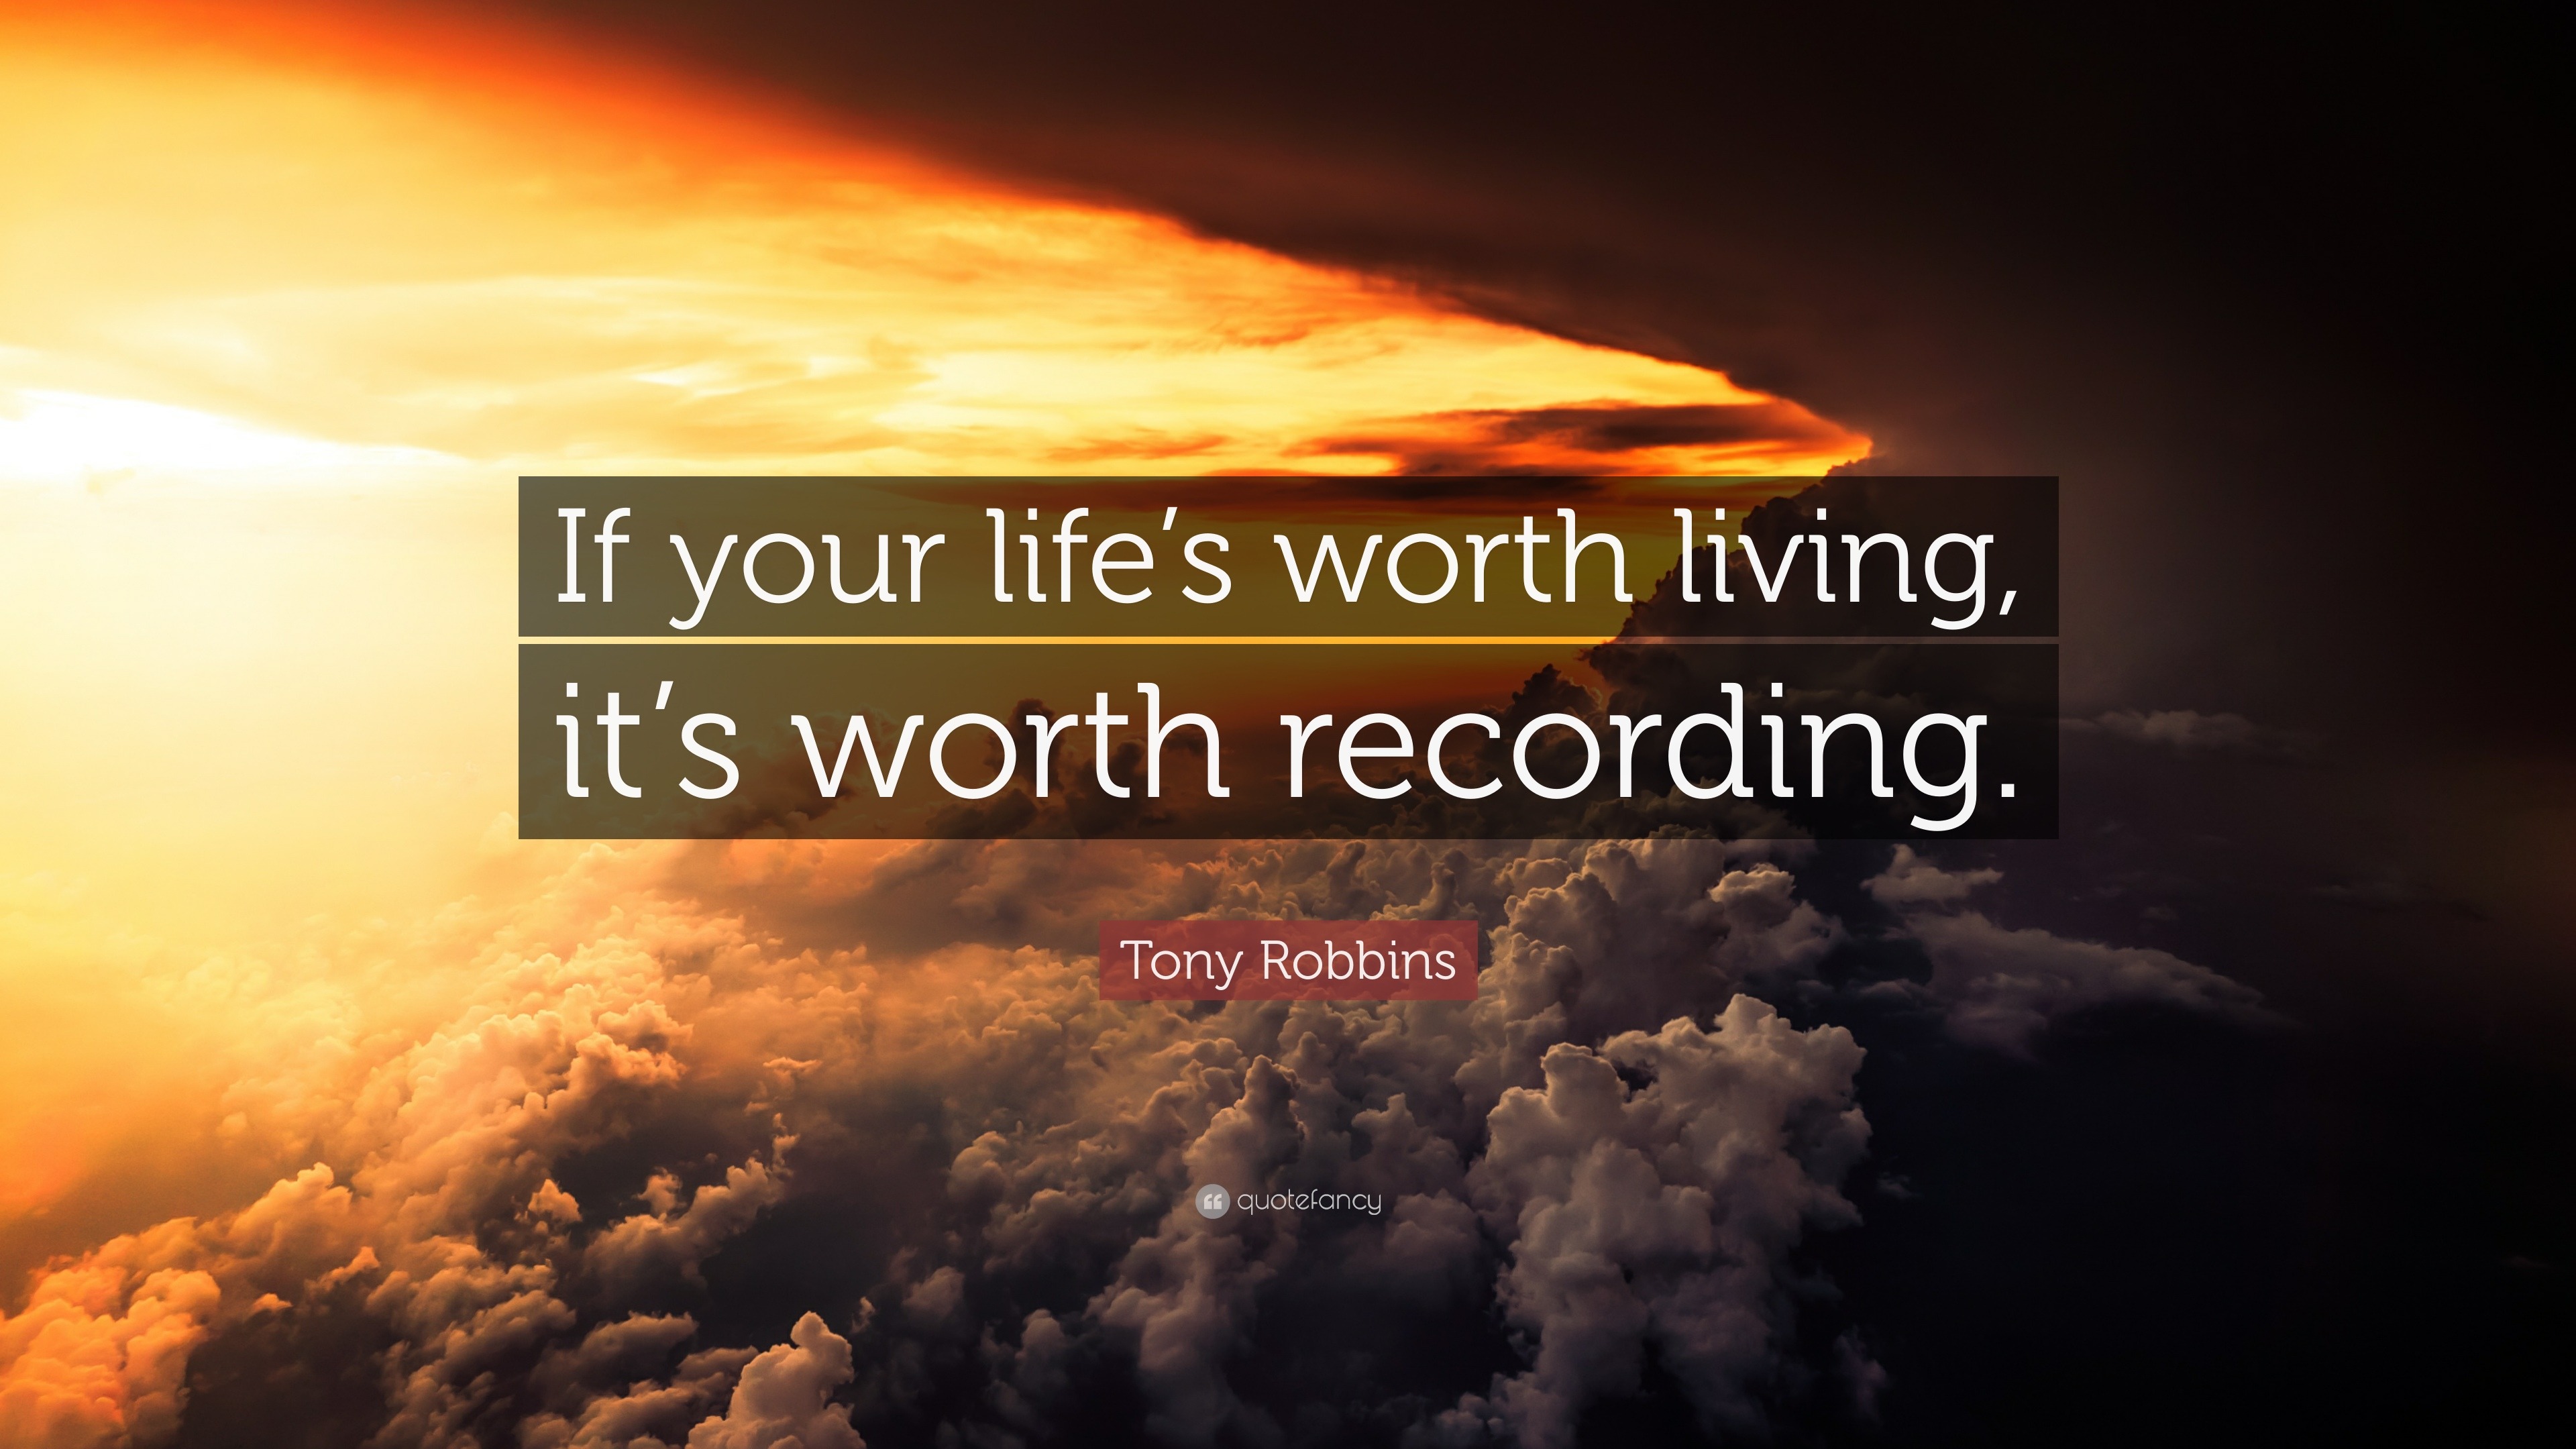 Tony Robbins Quote “If your life s worth living it s worth recording ”